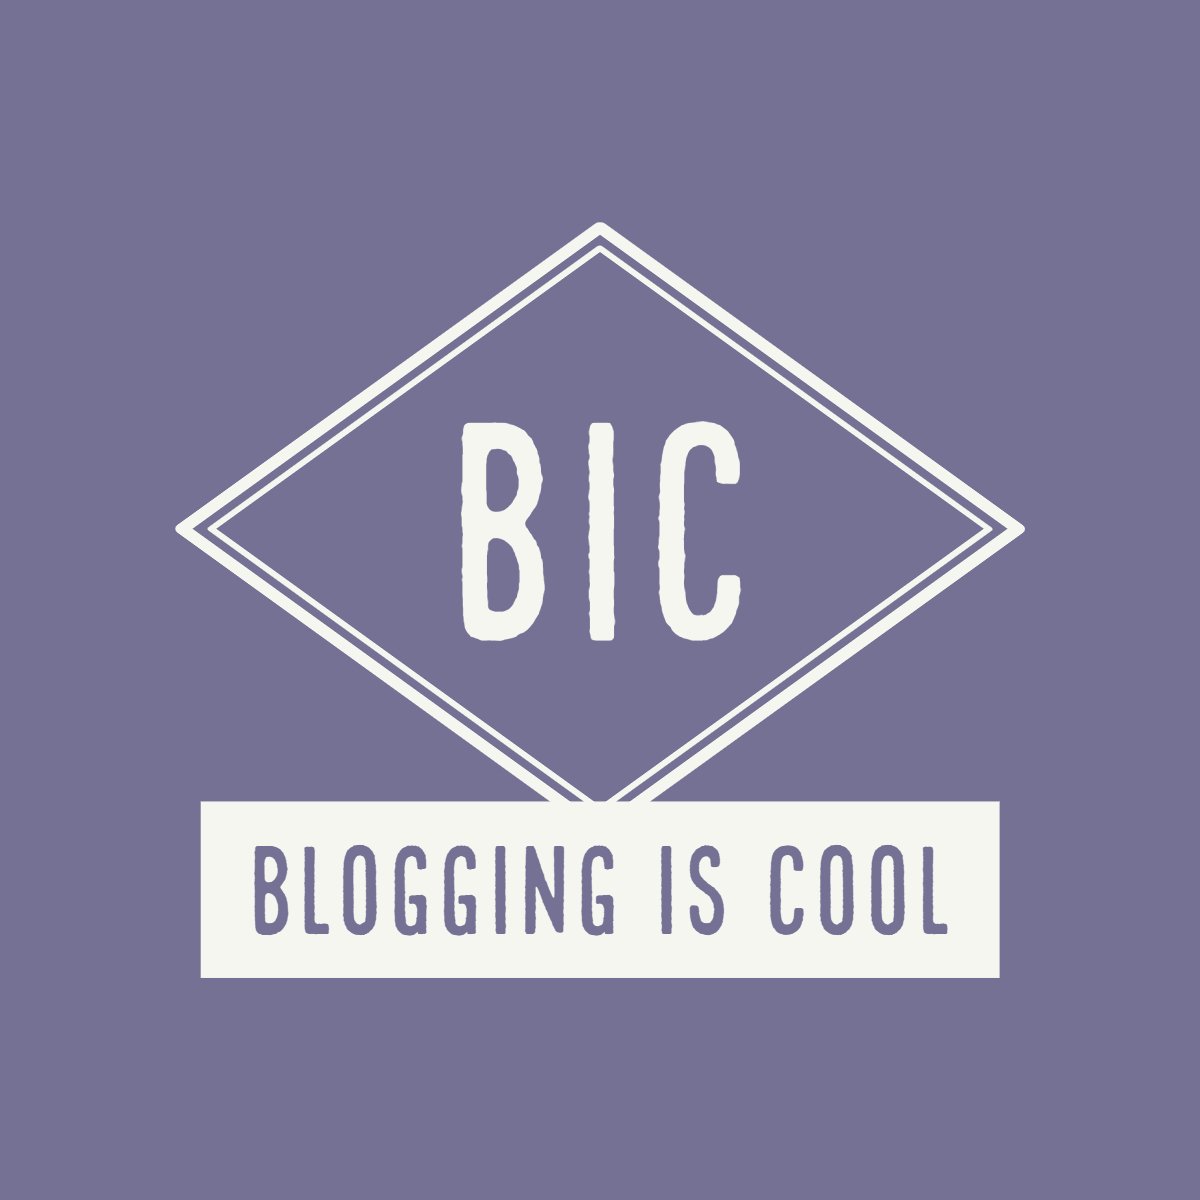 bloggingiscool.com is about helping bloggers become better